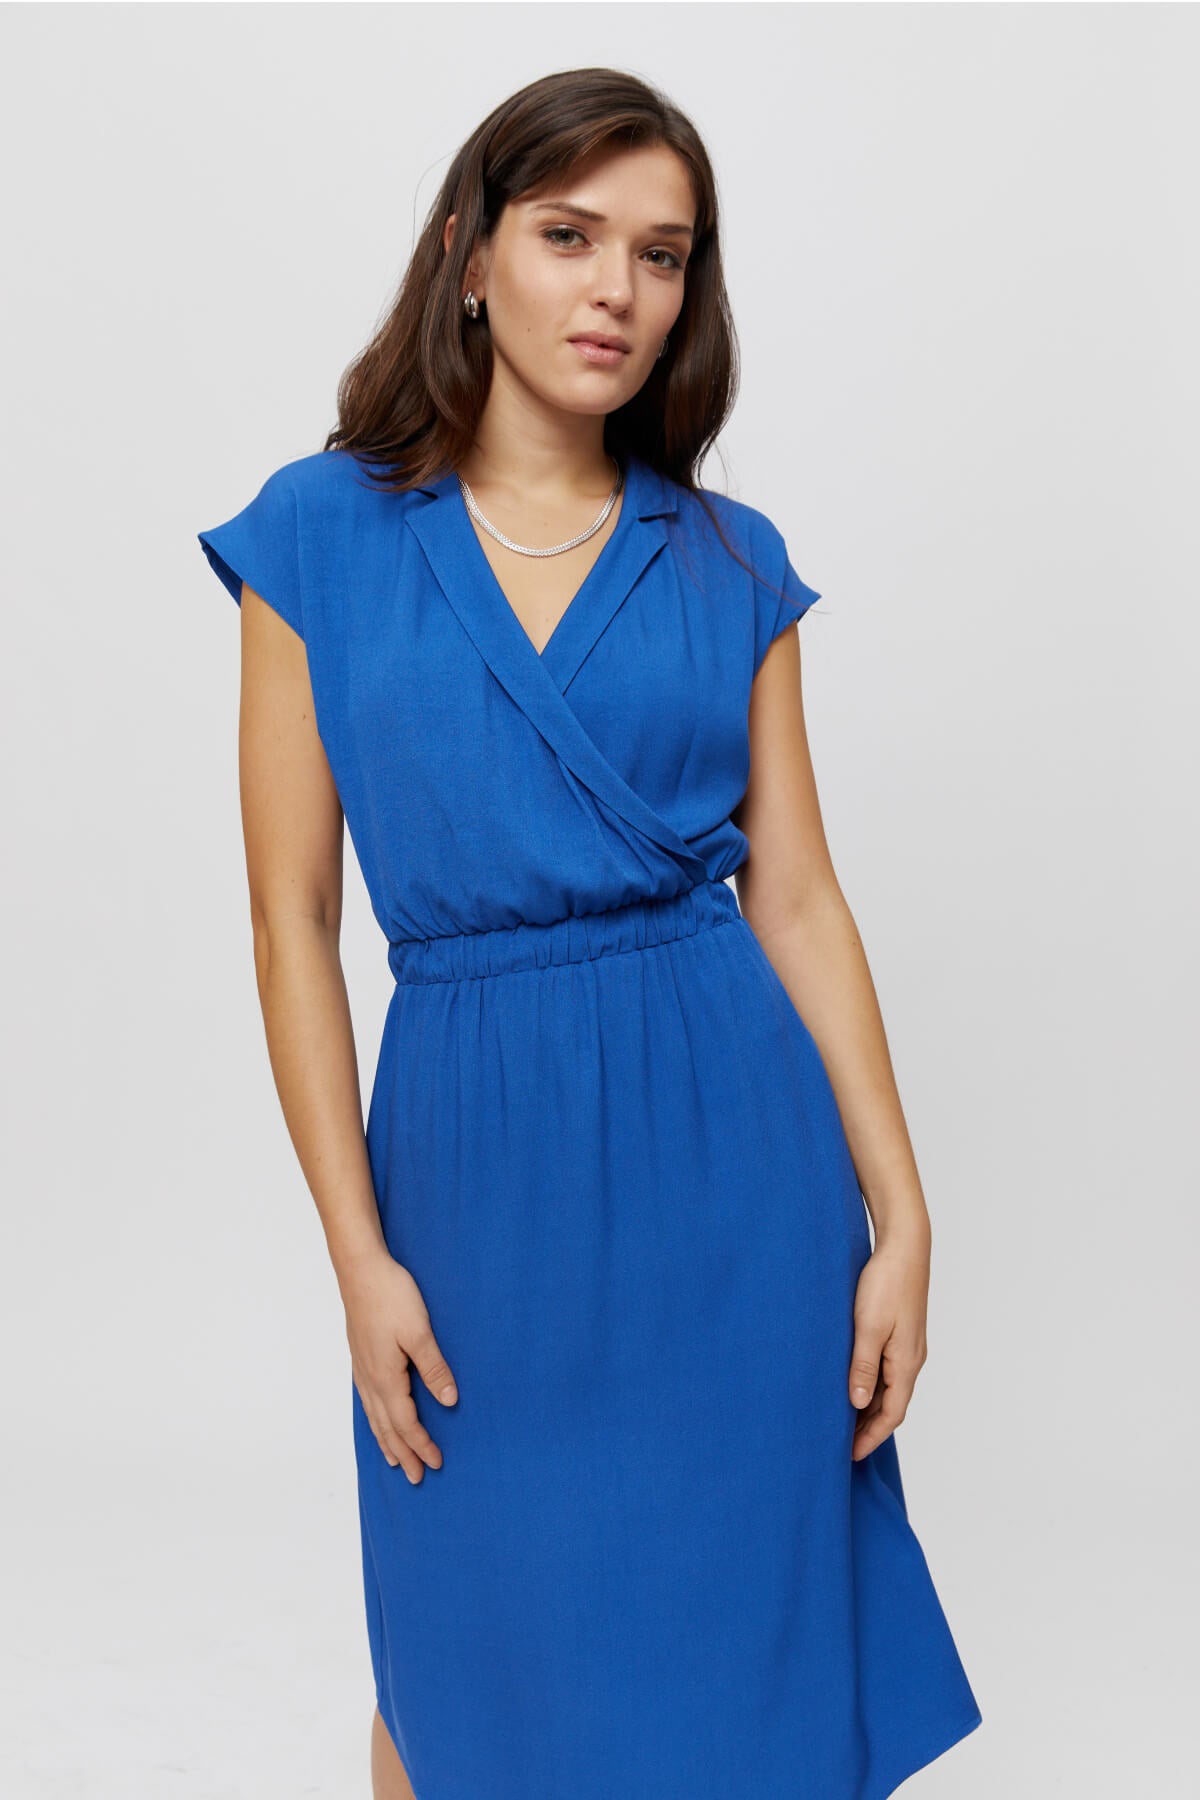 Lilit | Formal Midi Dress with Wrap Optic in Blue